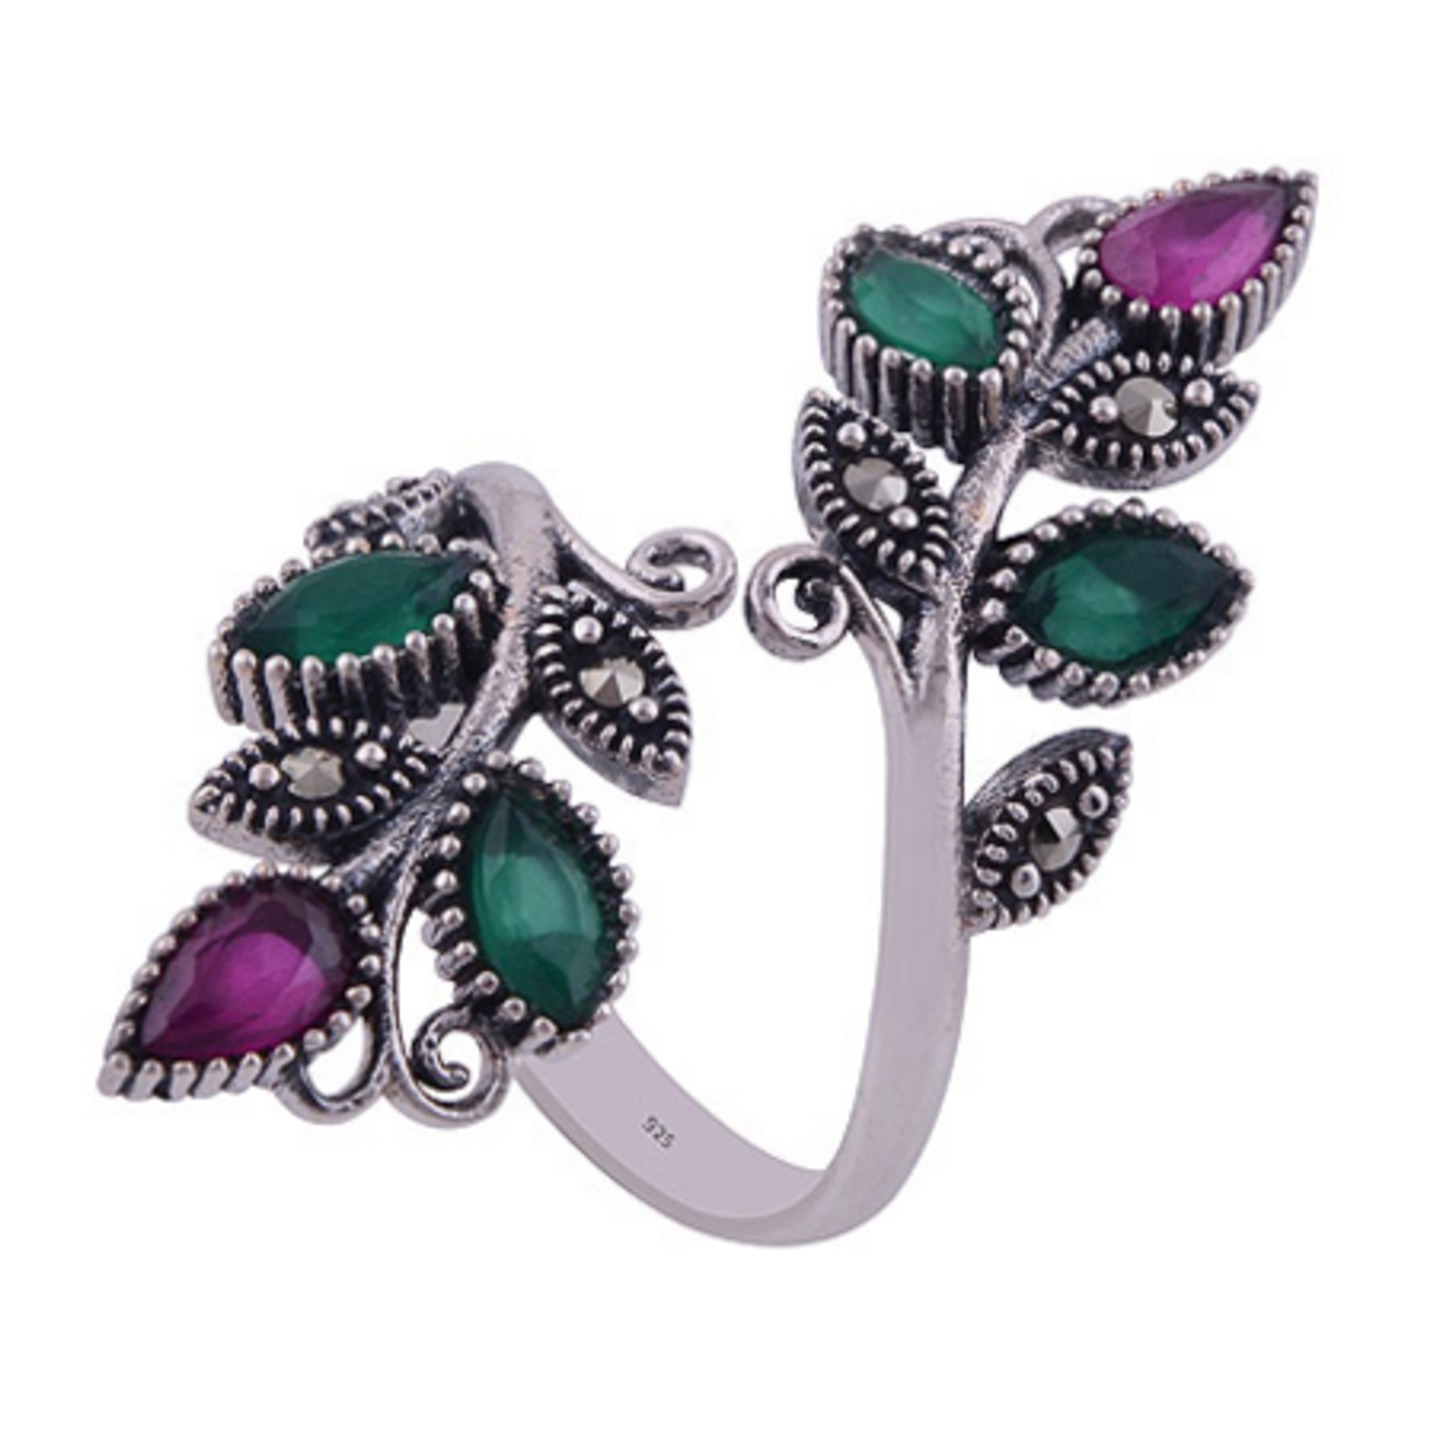 The Green Red Vine Silver Ring